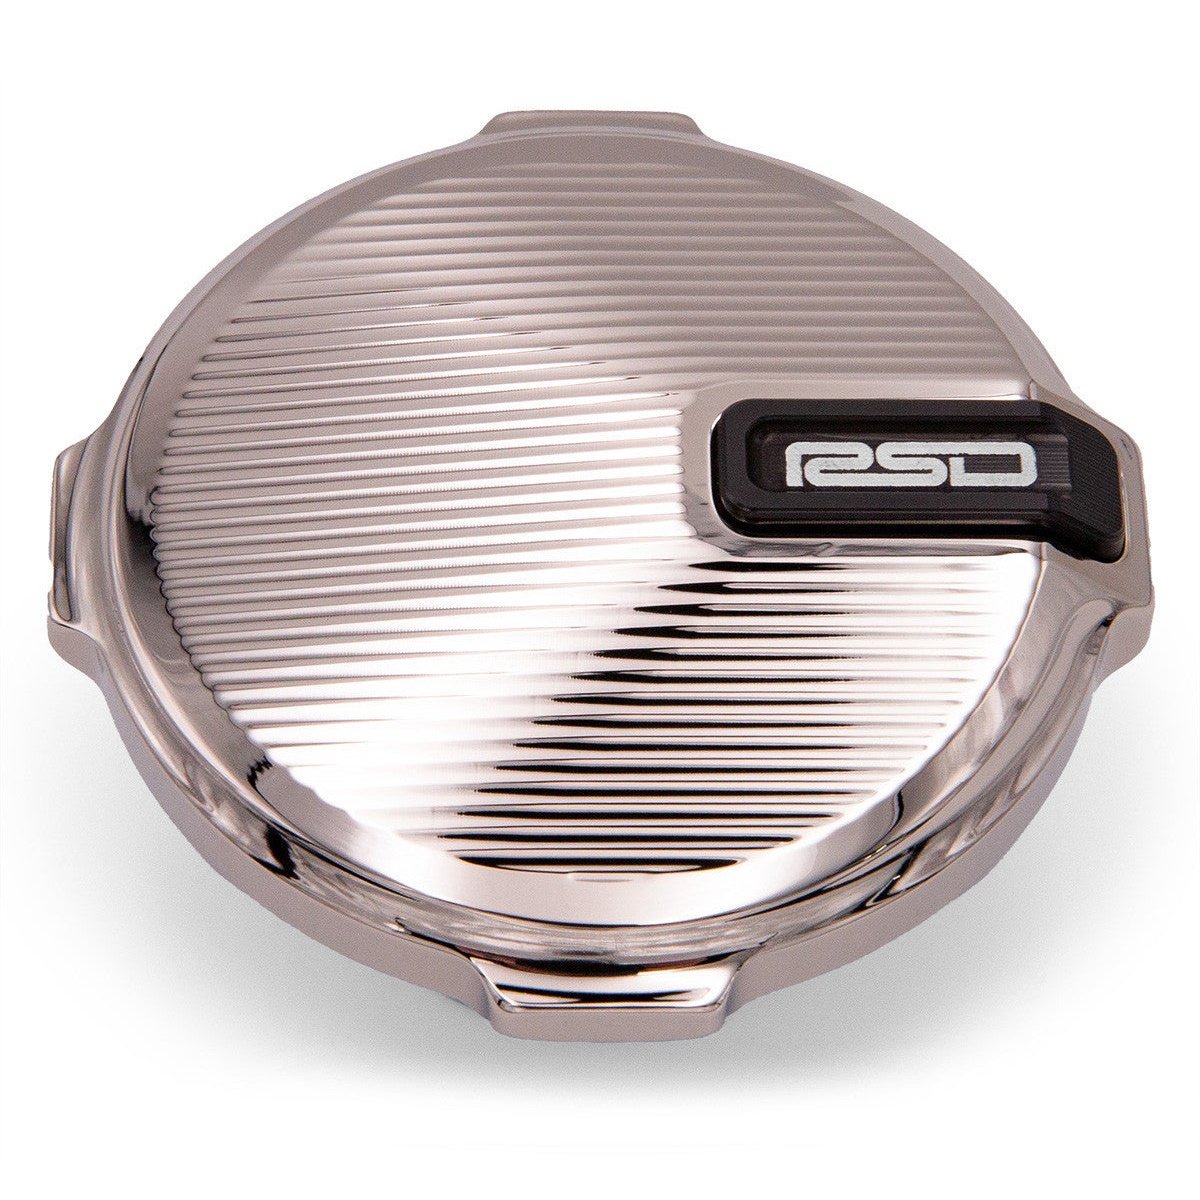 Sector Gas Cap for Harley